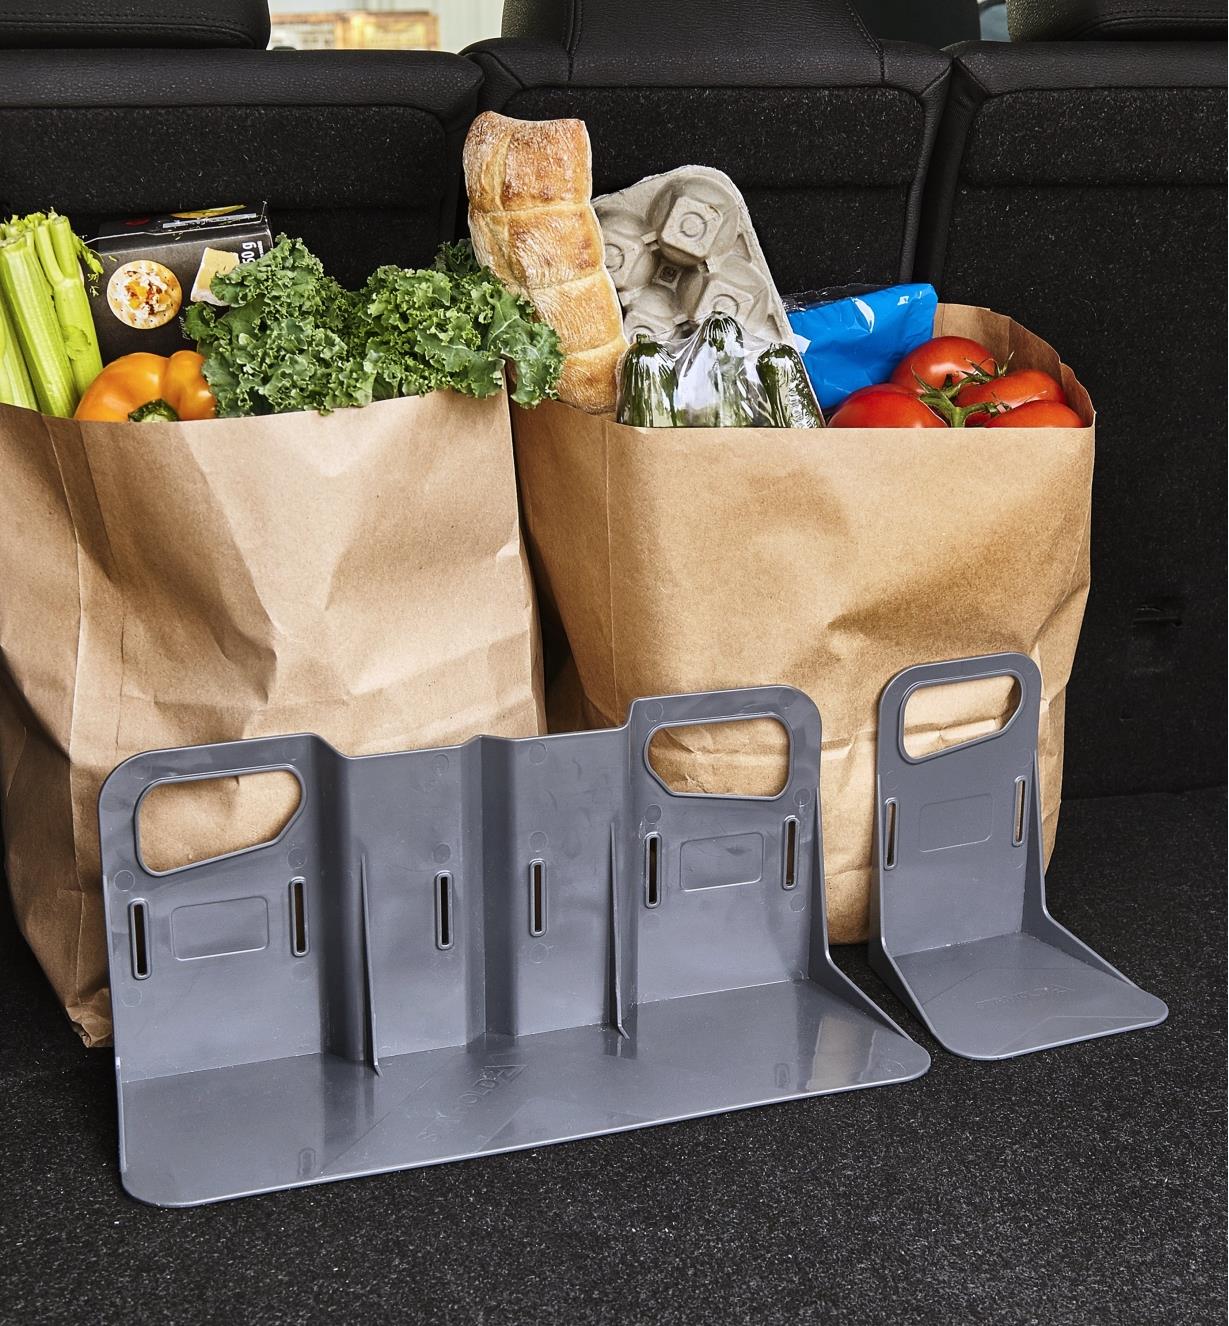 Cargo holder brackets holding grocery bags upright in a car’s cargo area